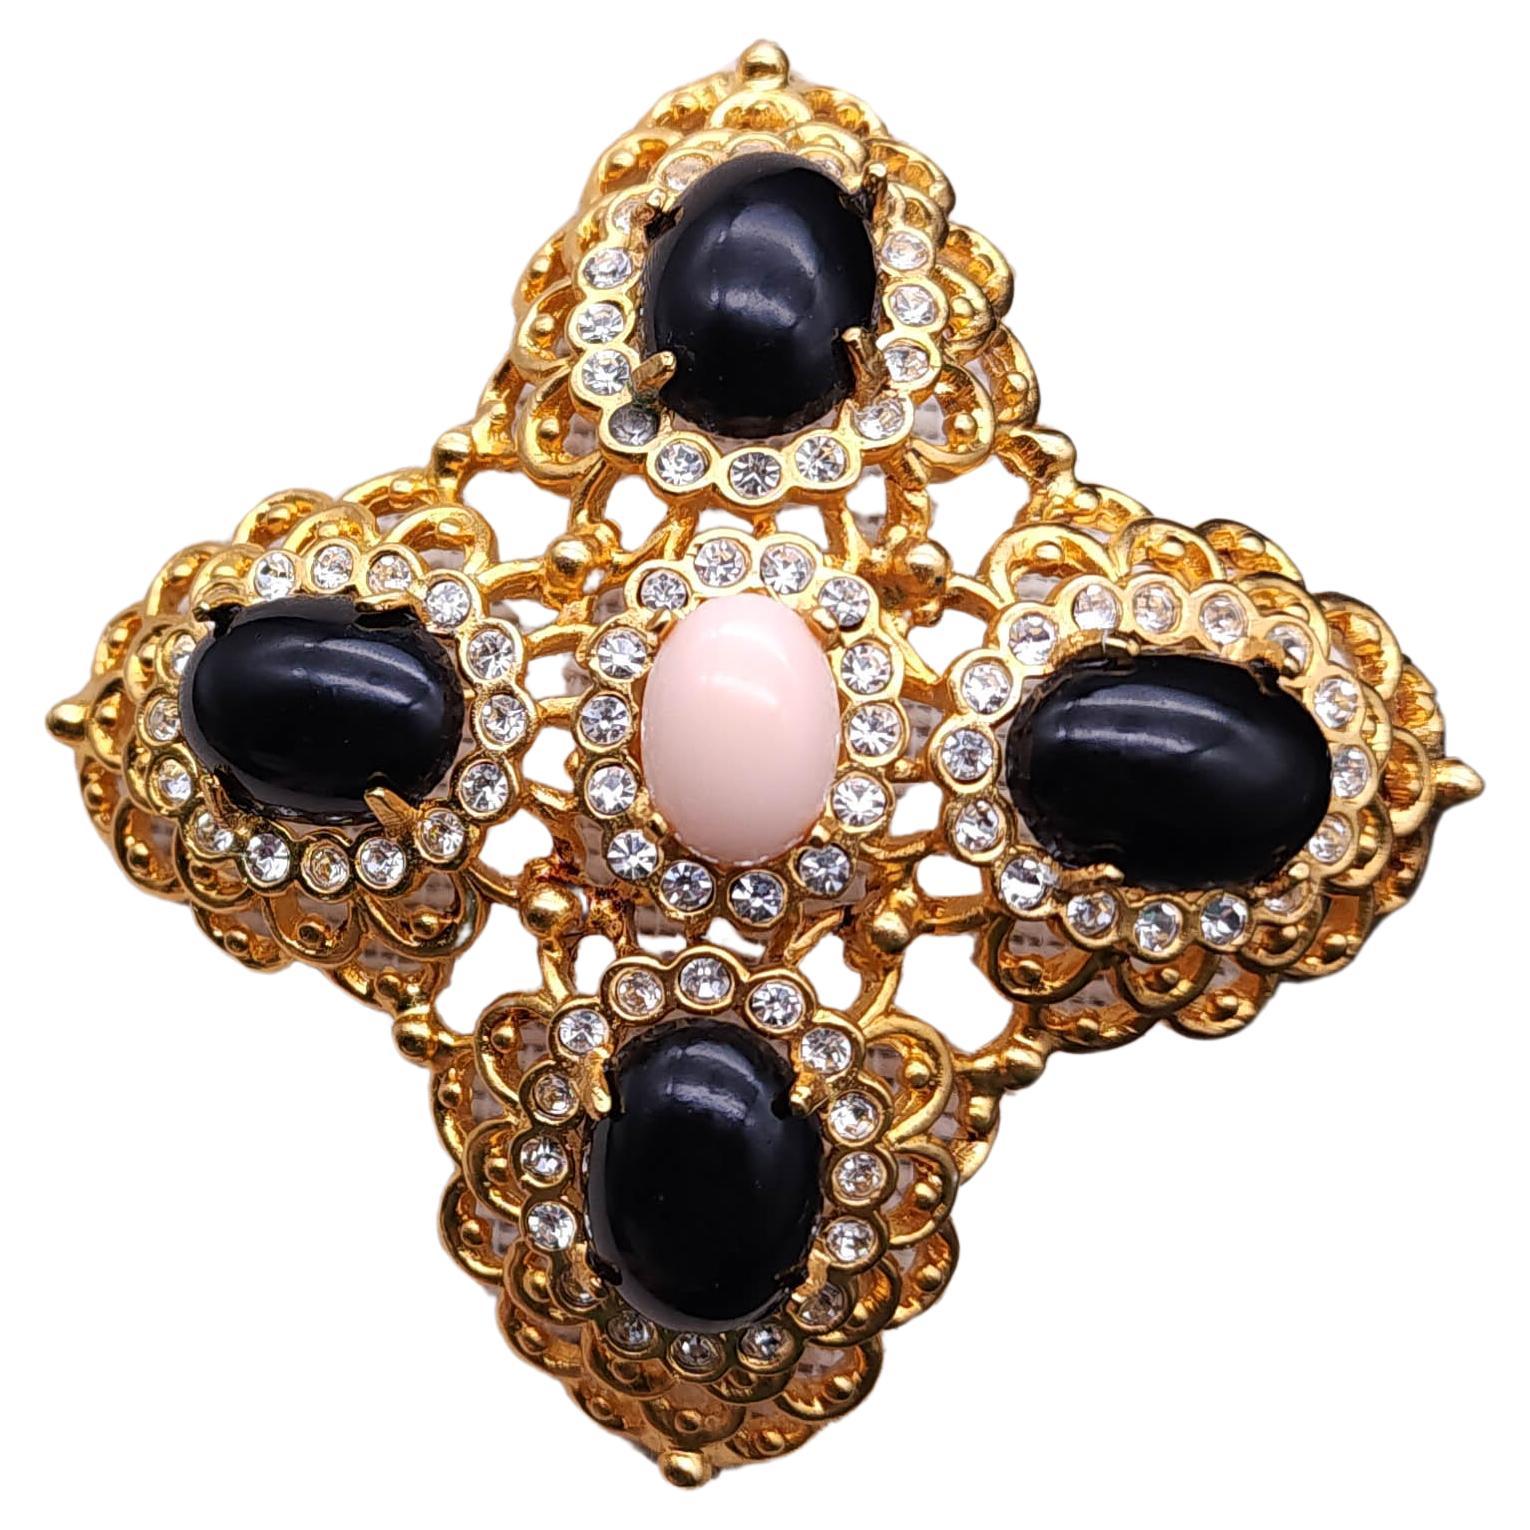 Kenneth Jay Lane Cabochon Cross Pin Brooch, Black & Pink, Gold Finish, Crystals For Sale